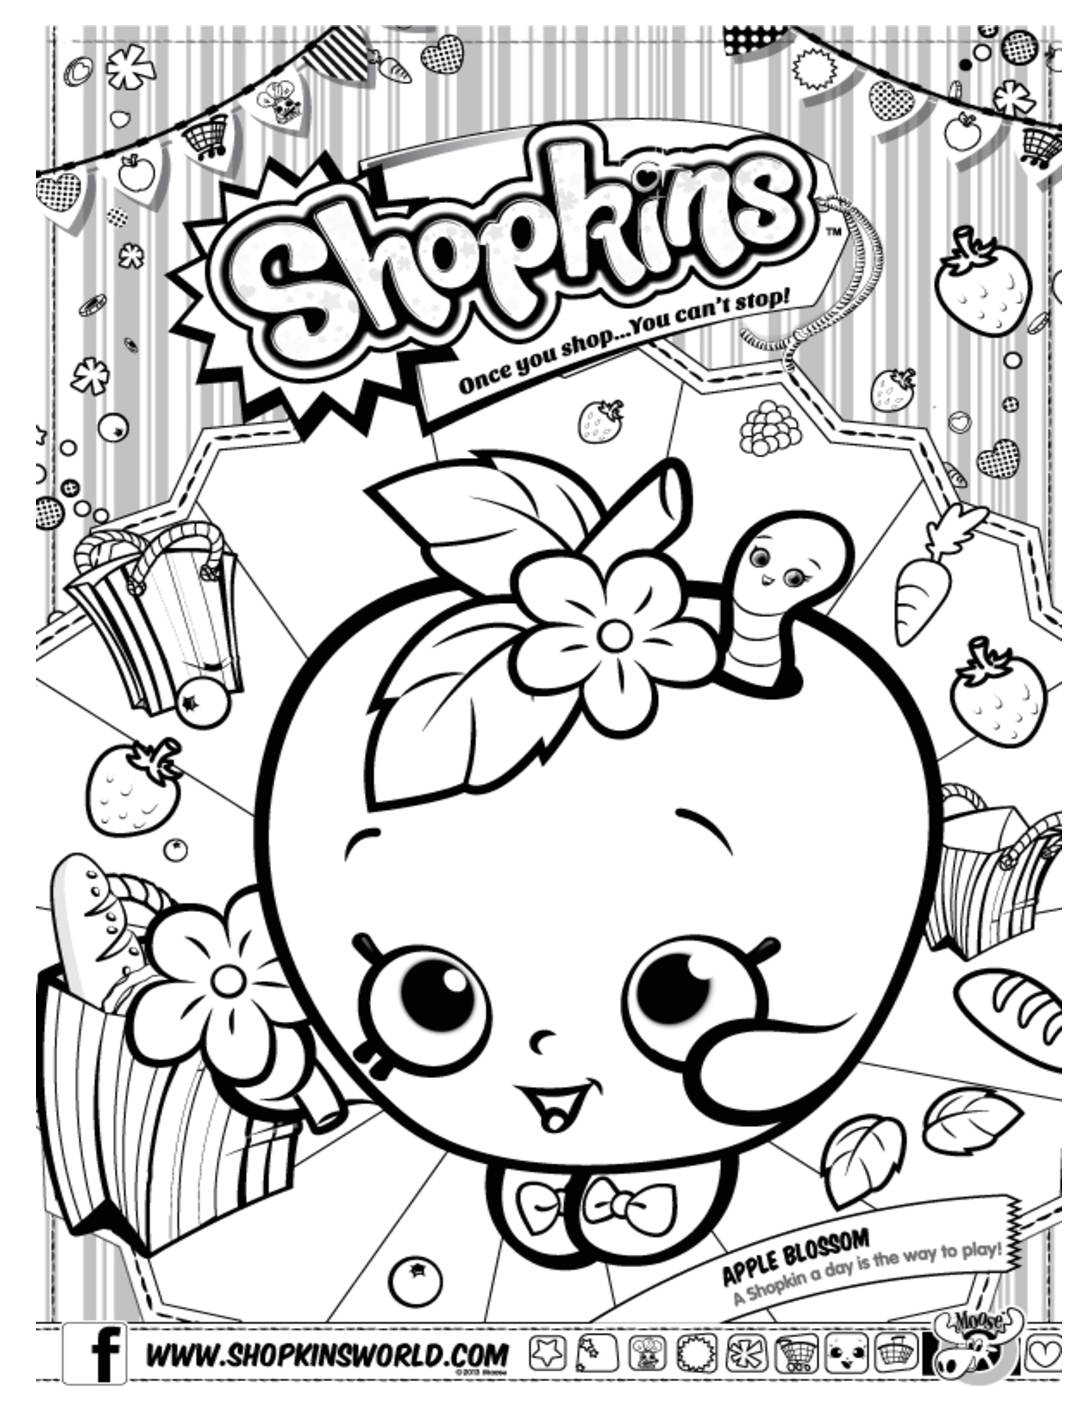 Shopkins Coloring Page 20